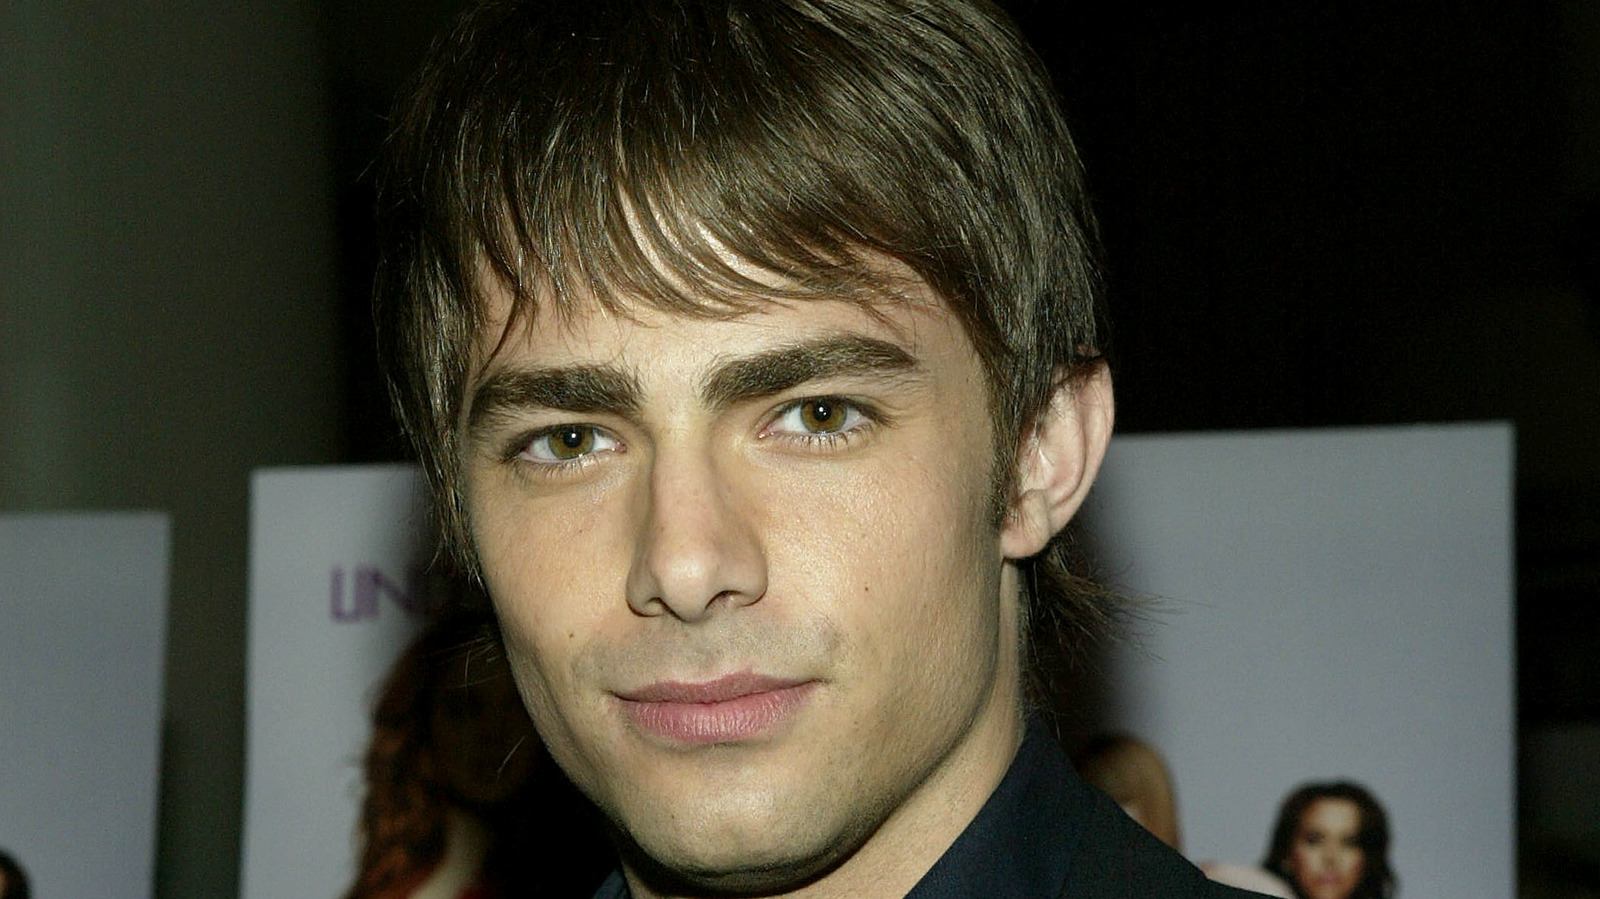 What Happened To The Actor Who Played Aaron Samuels In Mean Girls?